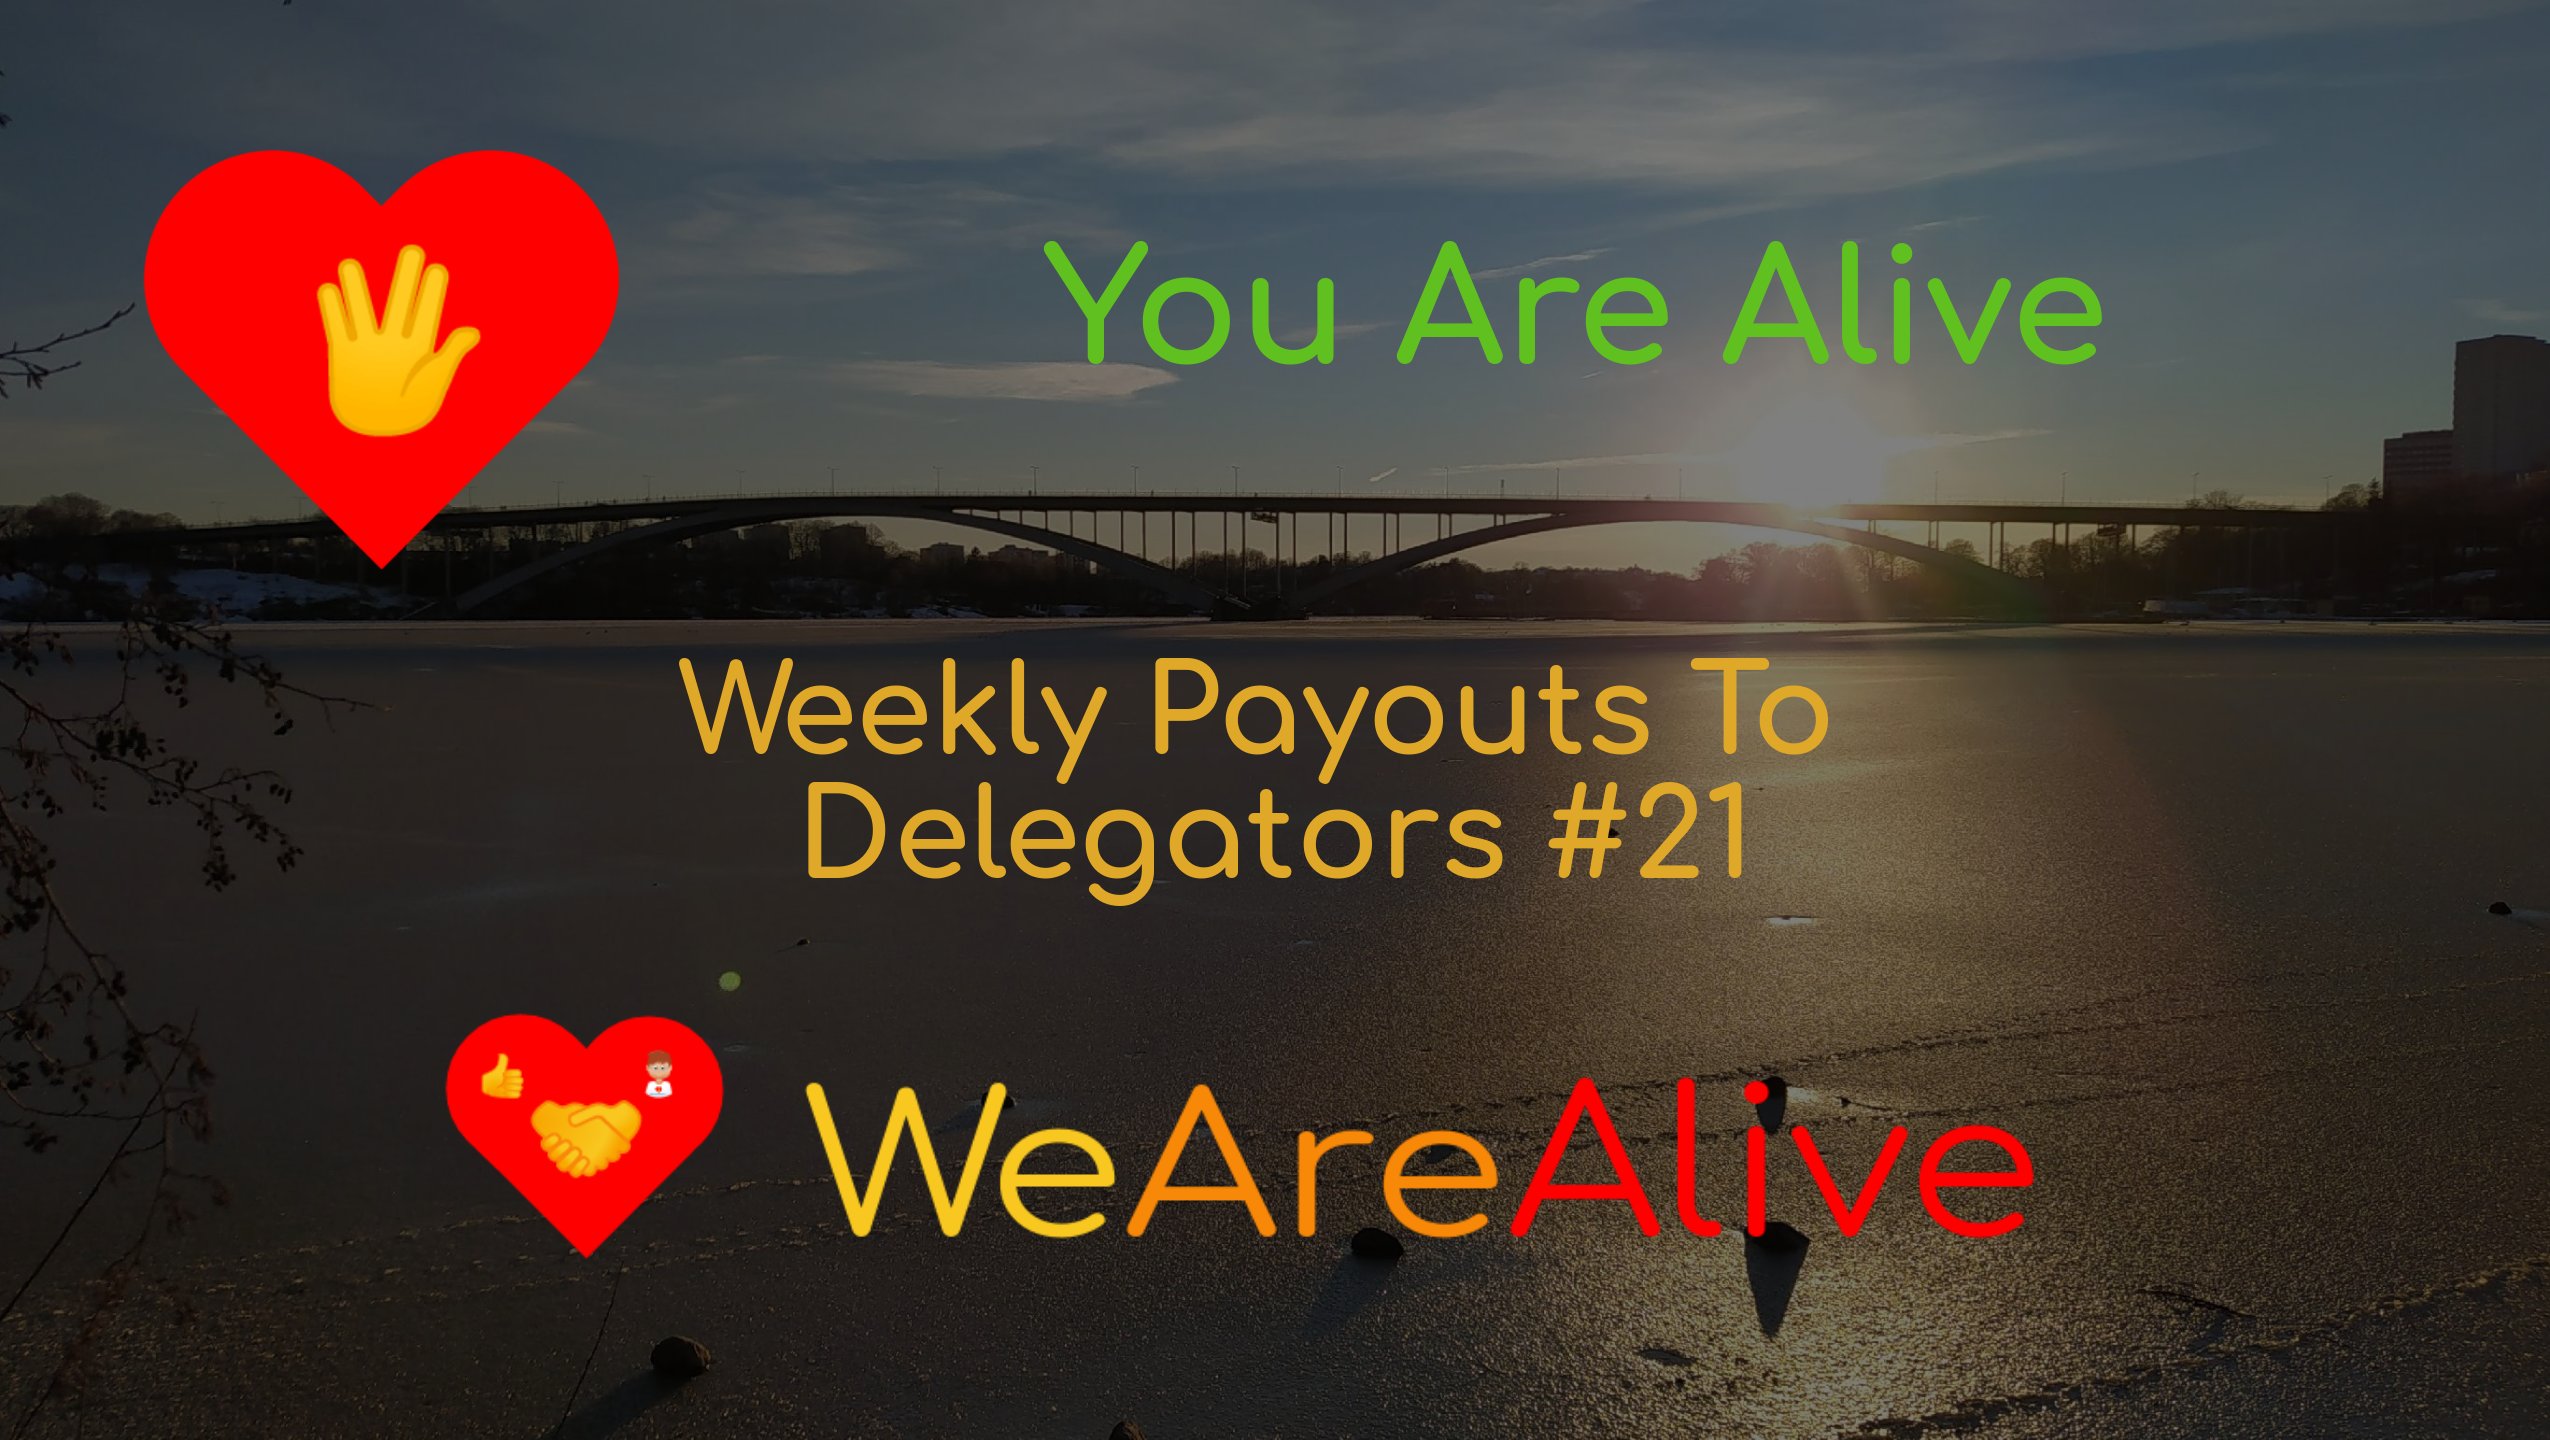 @youarealive/you-are-alive-weekly-payouts-to-delegators-21